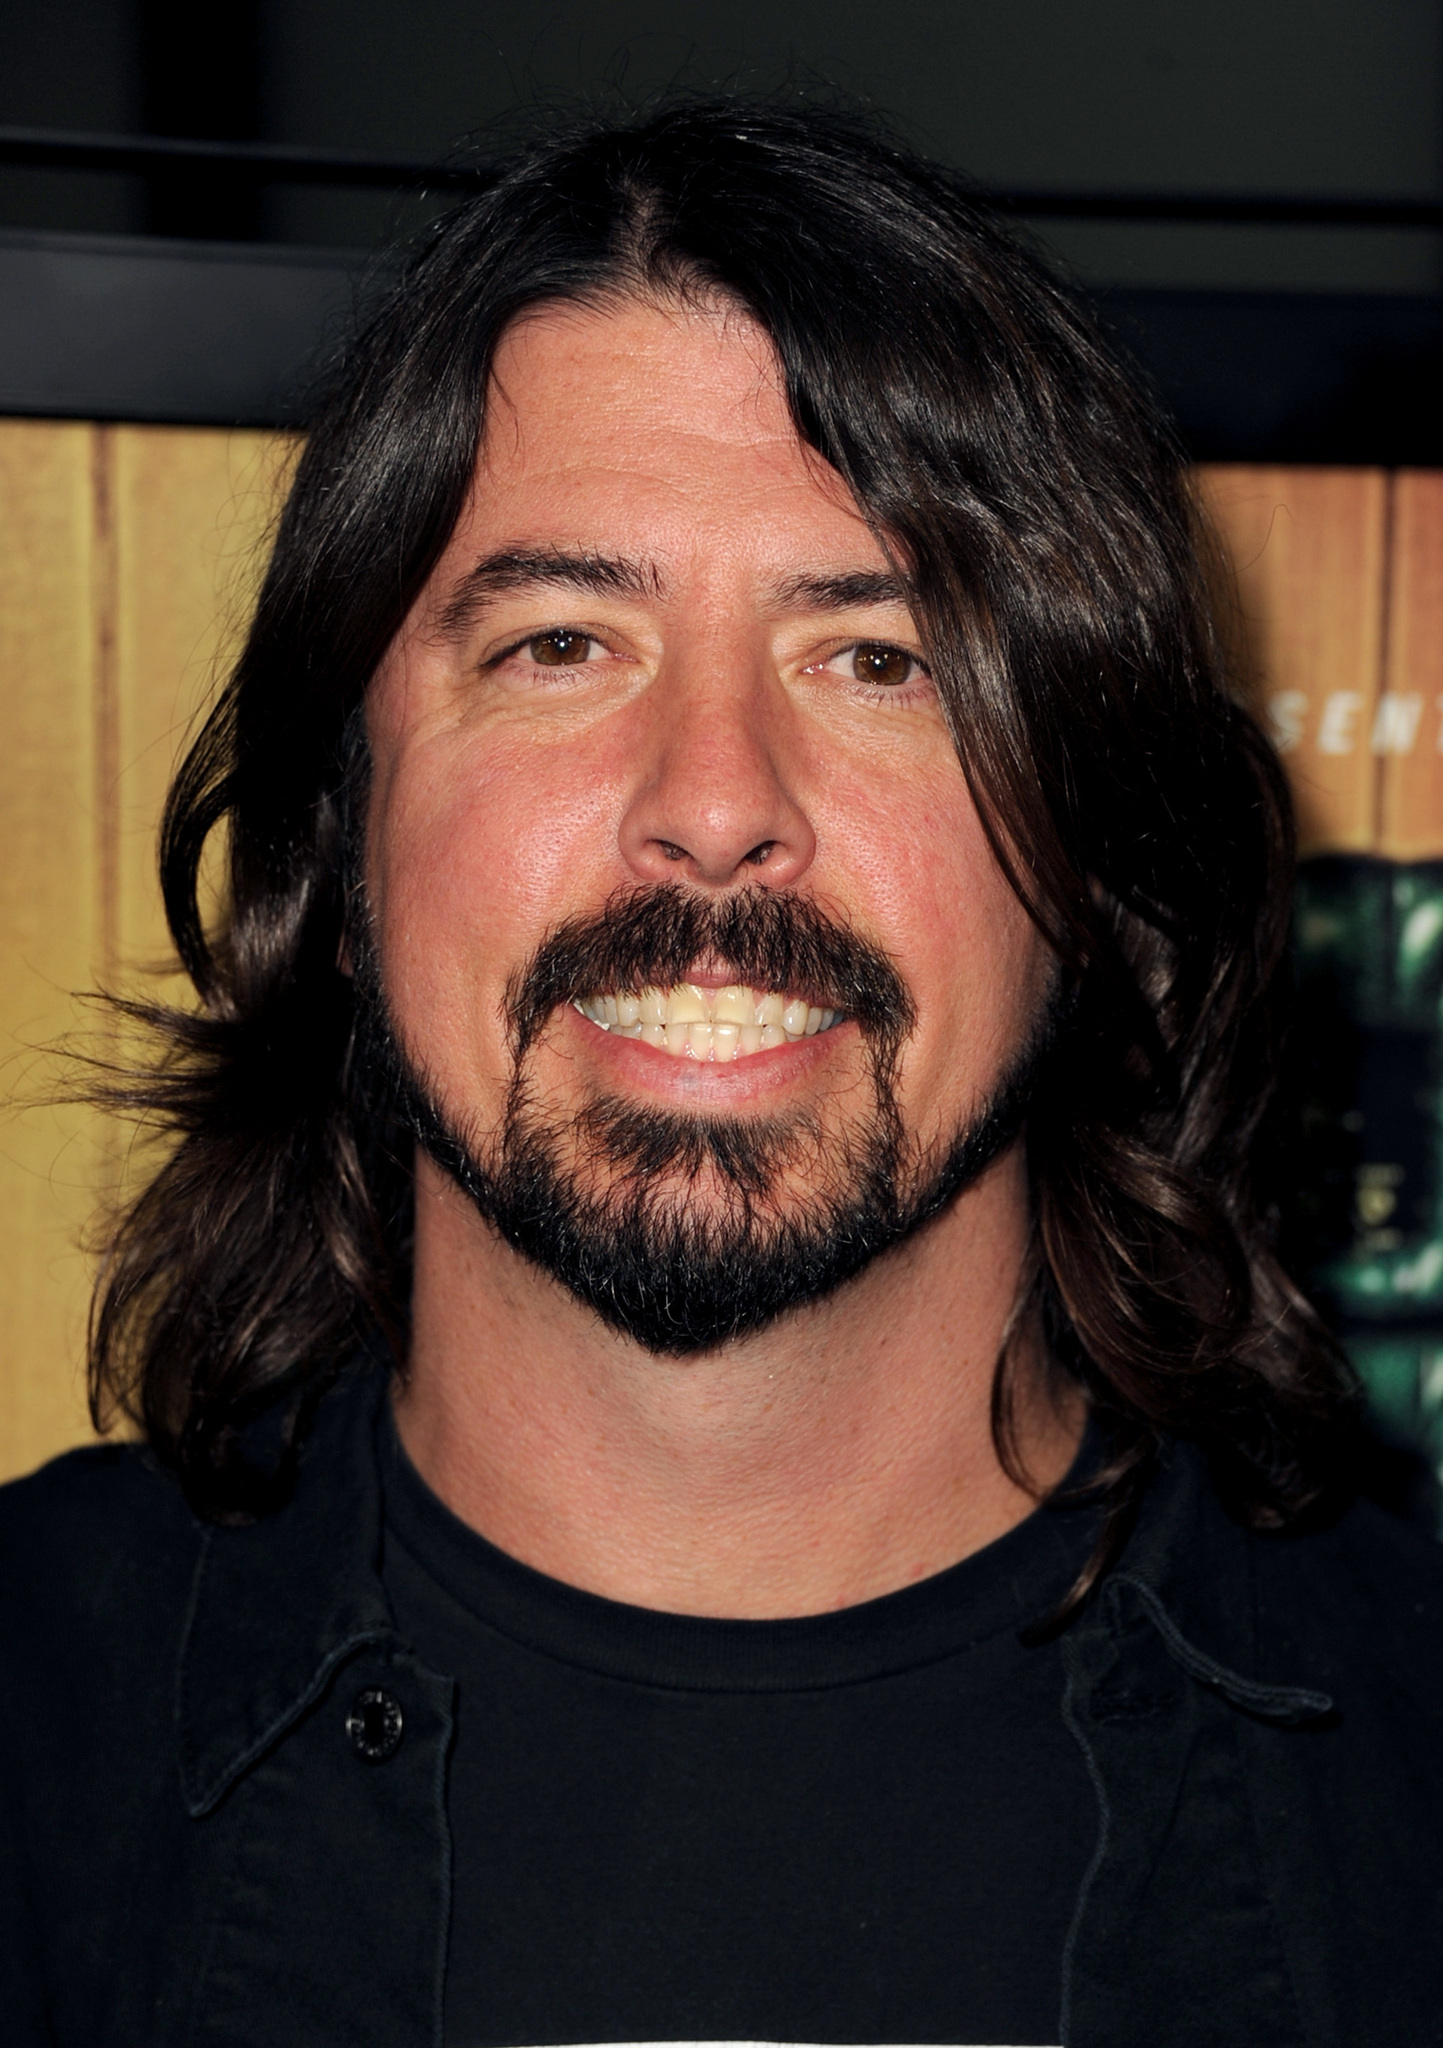 Dave Grohl biography